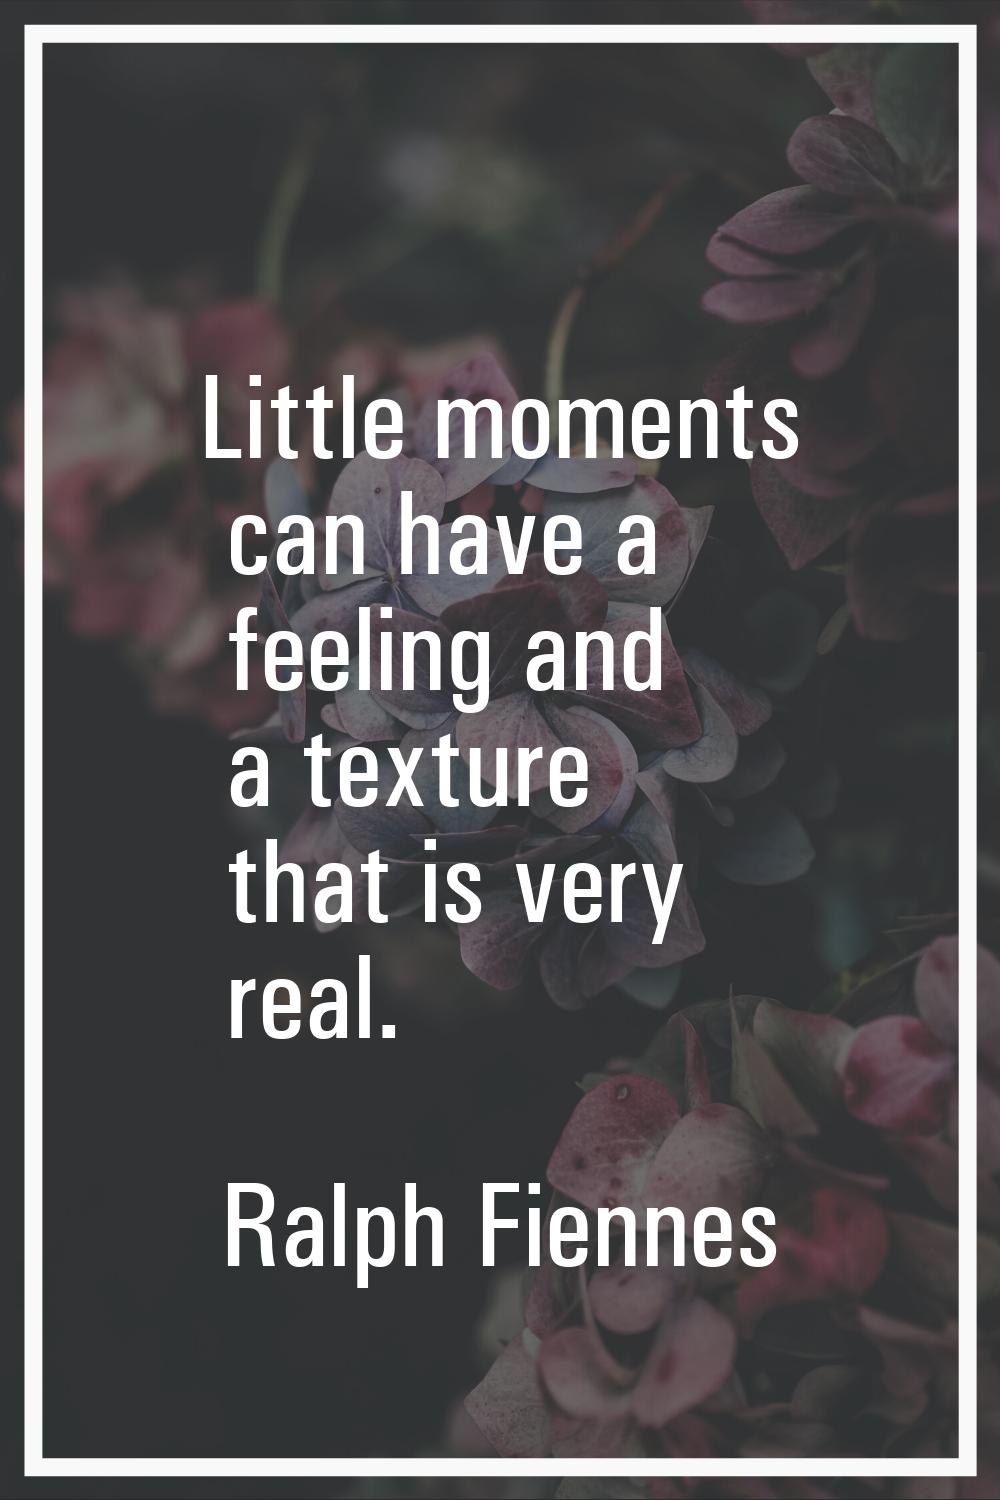 Little moments can have a feeling and a texture that is very real.